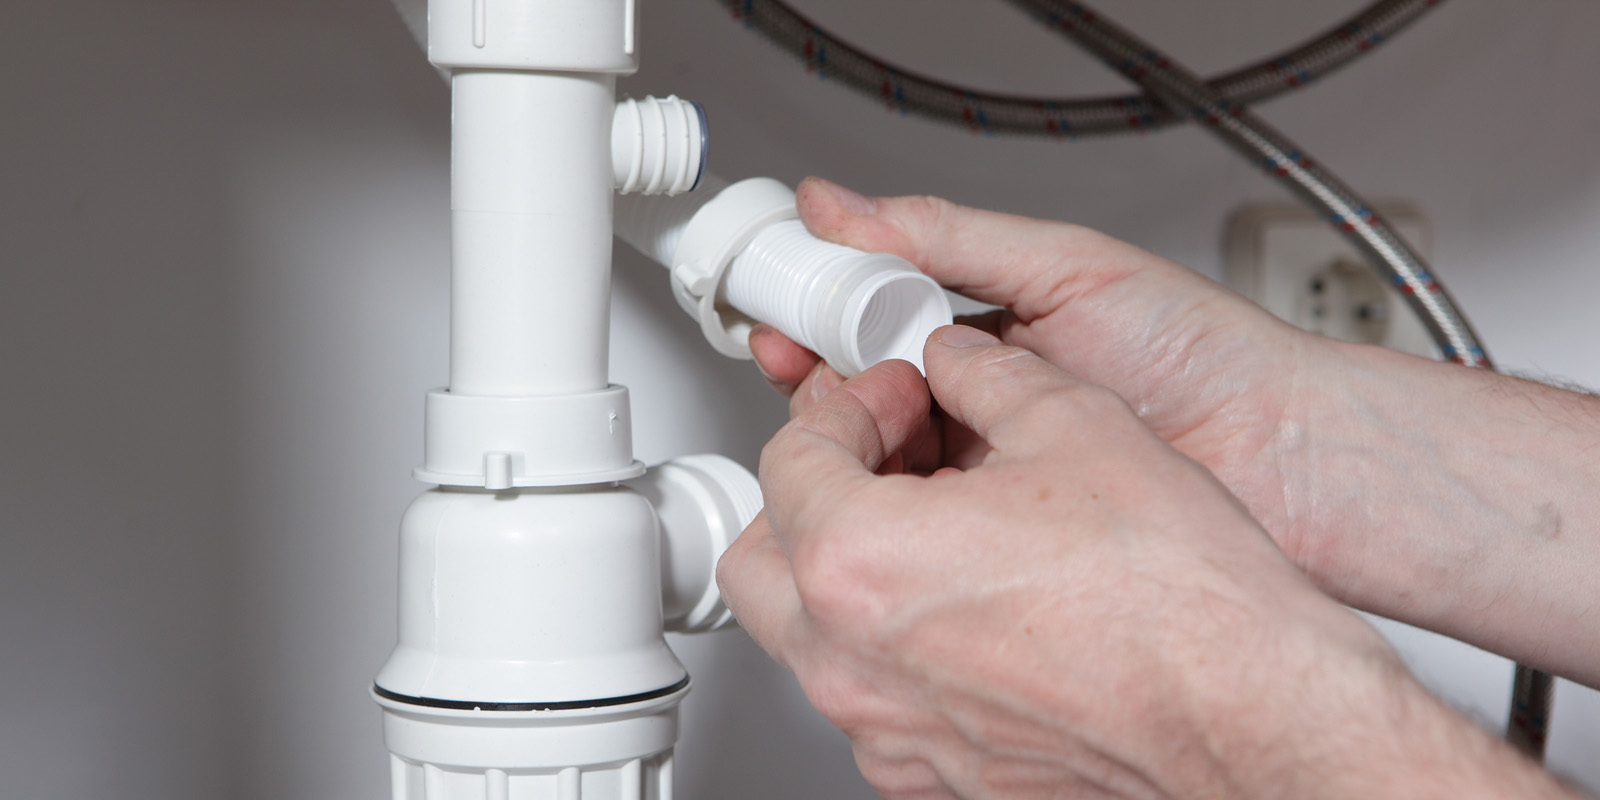 Plumbing & drainage in Dudley